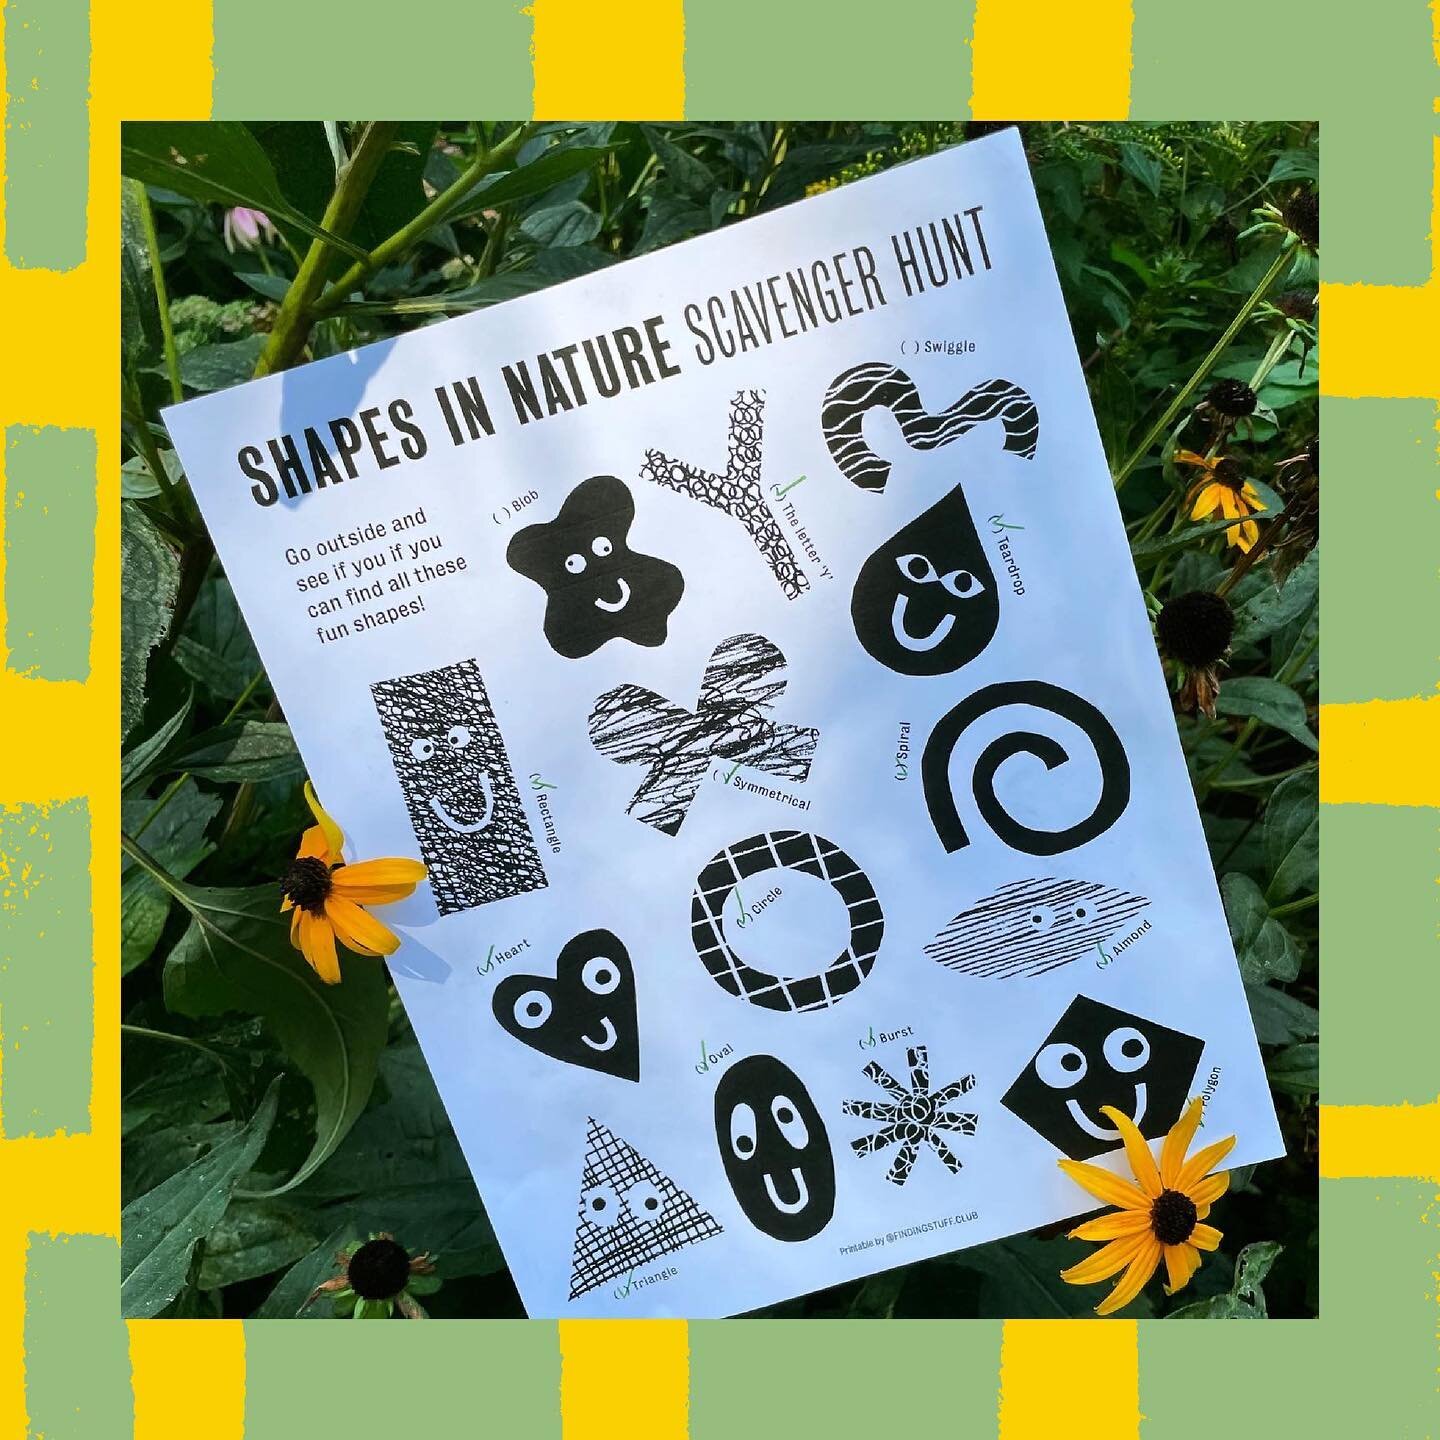 Happy Earth Day! Go explore all the shapes nature has to offer with our Shapes in Nature scavenger hunt. 🌍 🍃 👀🍄